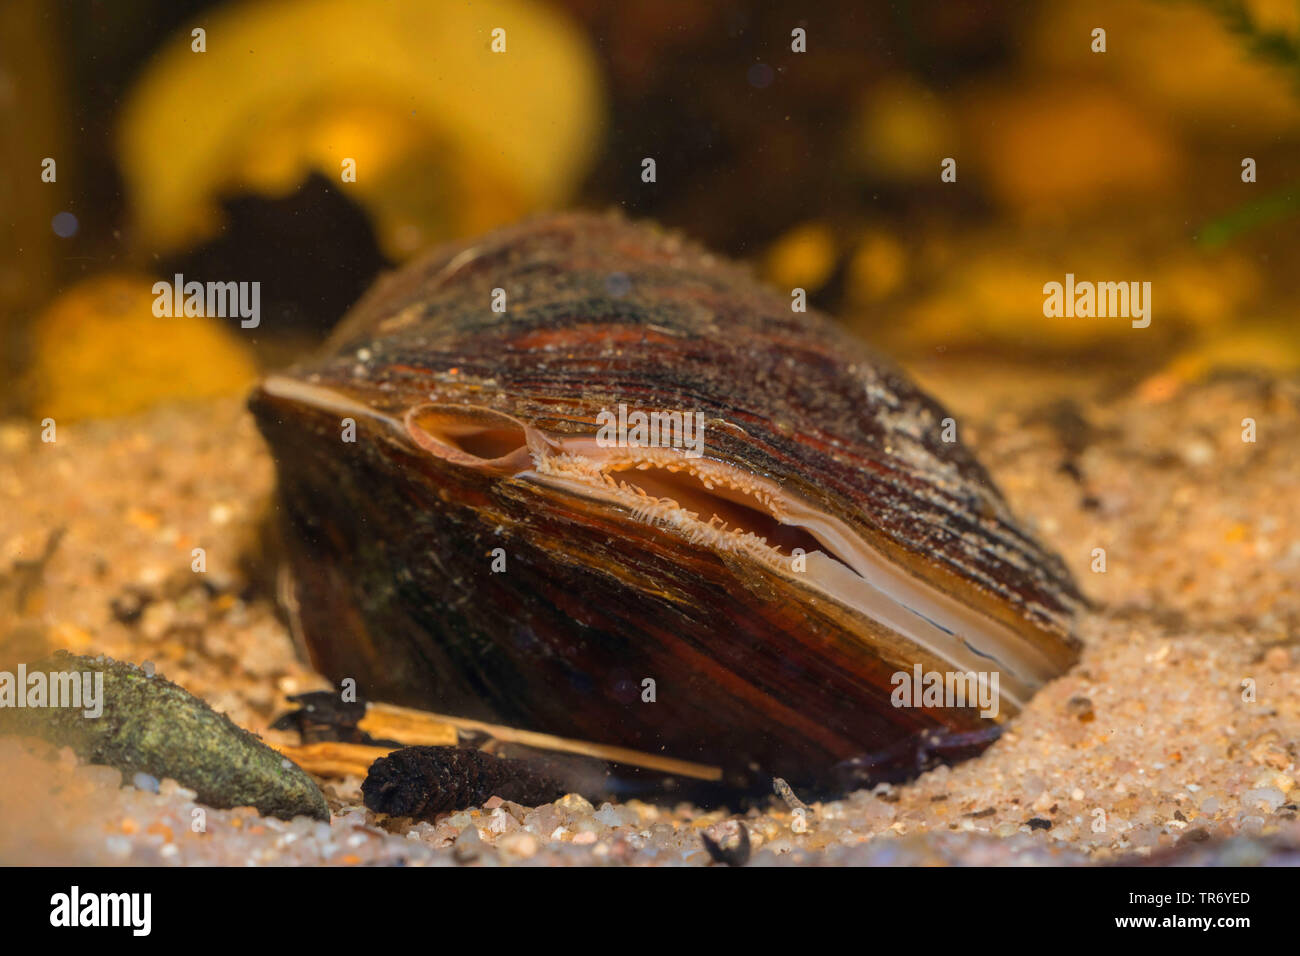 Common pond mussel, duck mussel (Anodonta anatina), detail with in and out siphons, Germany Stock Photo